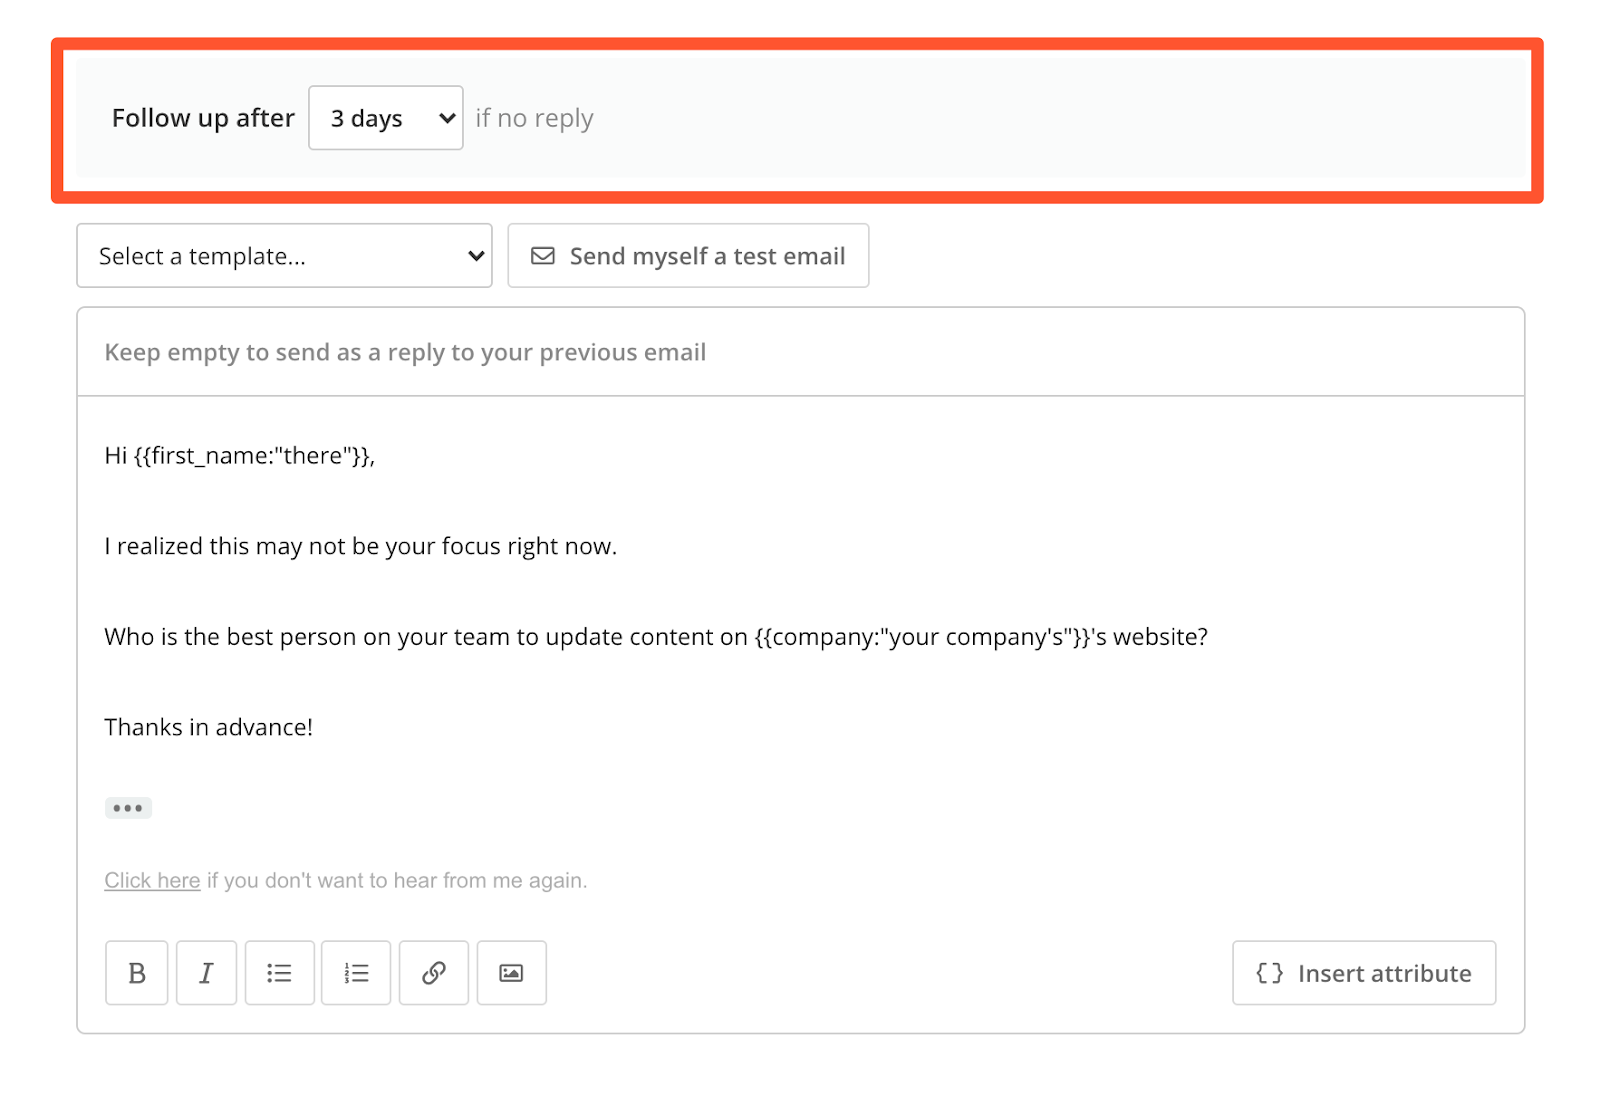 Follow-up email template example